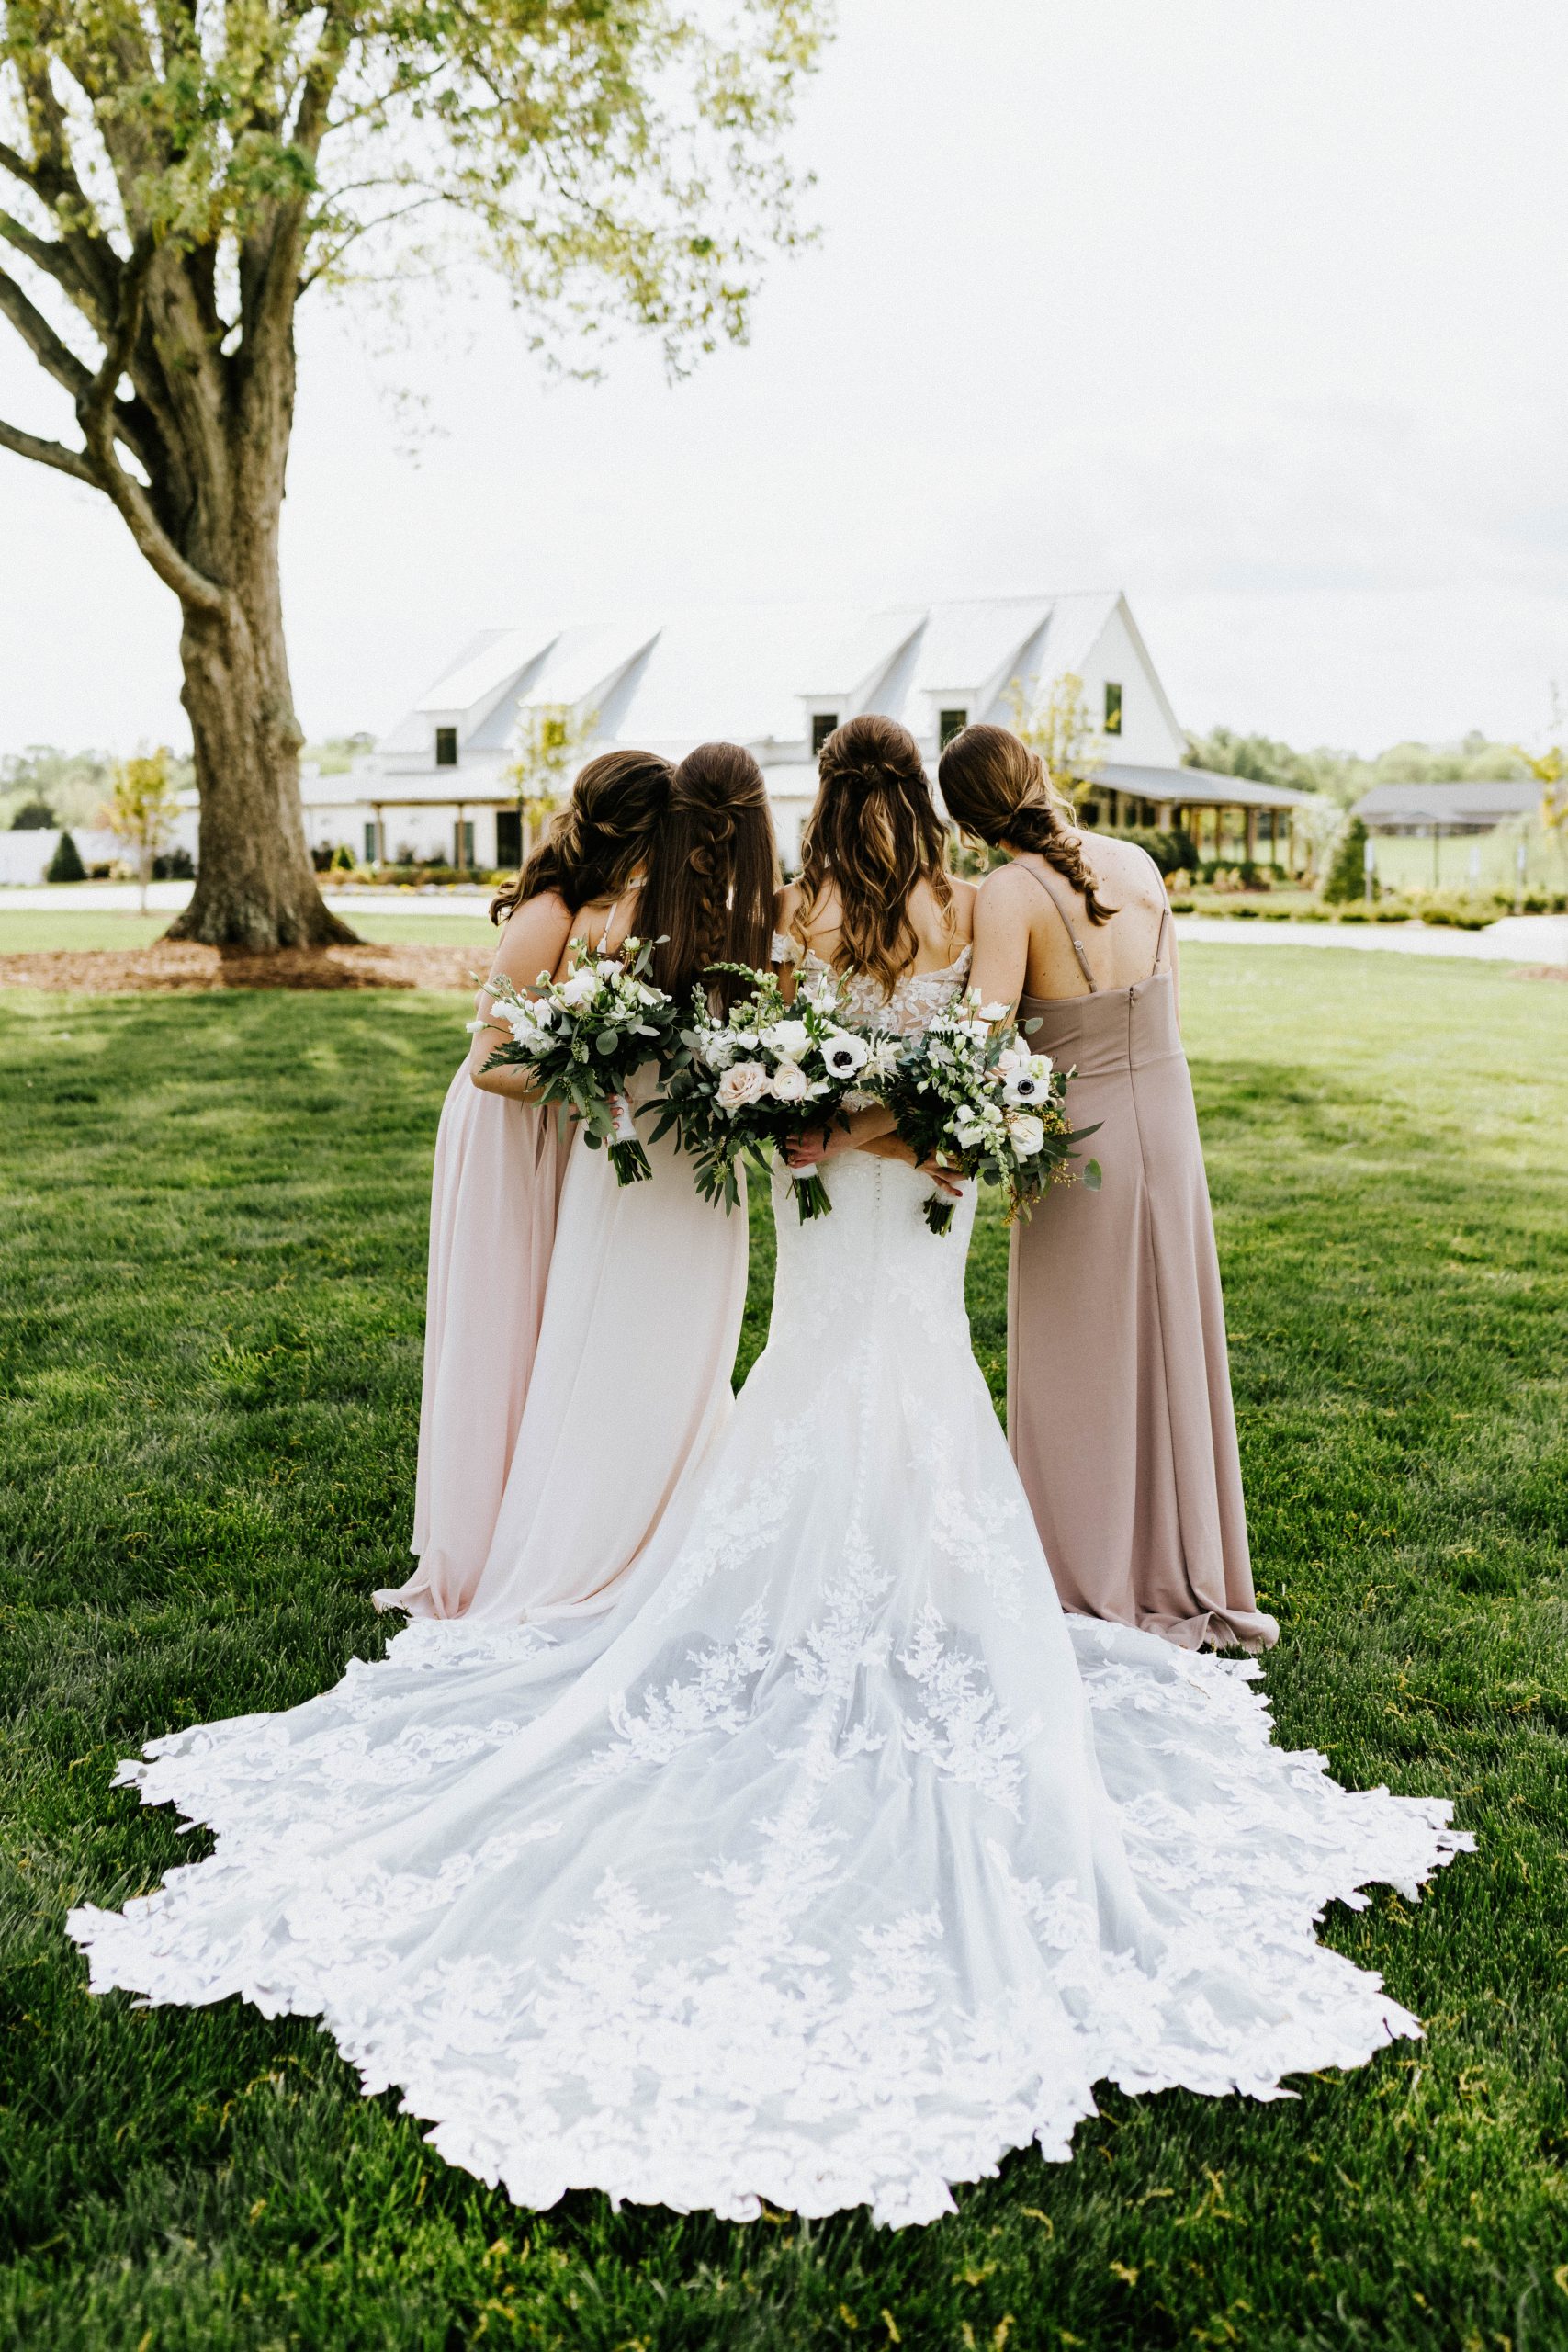 Choosing Your Bridesmaids for Your Special Day